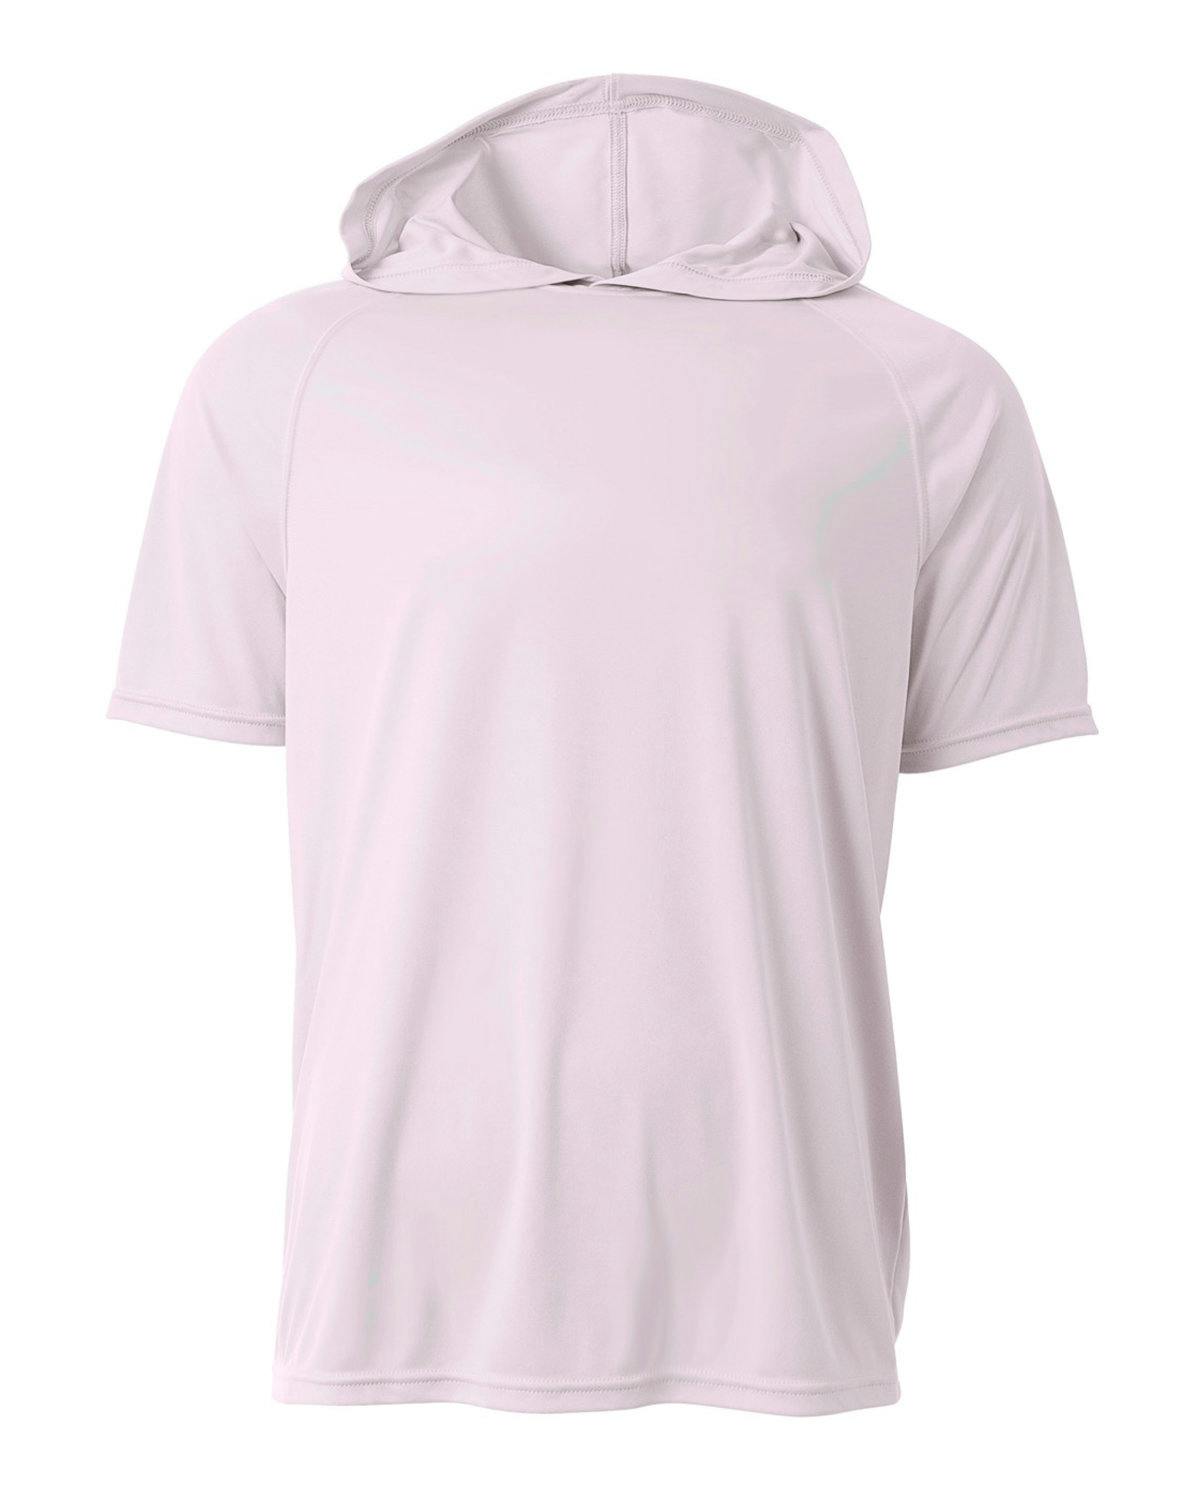 Image for Men's Cooling Performance Hooded T-shirt